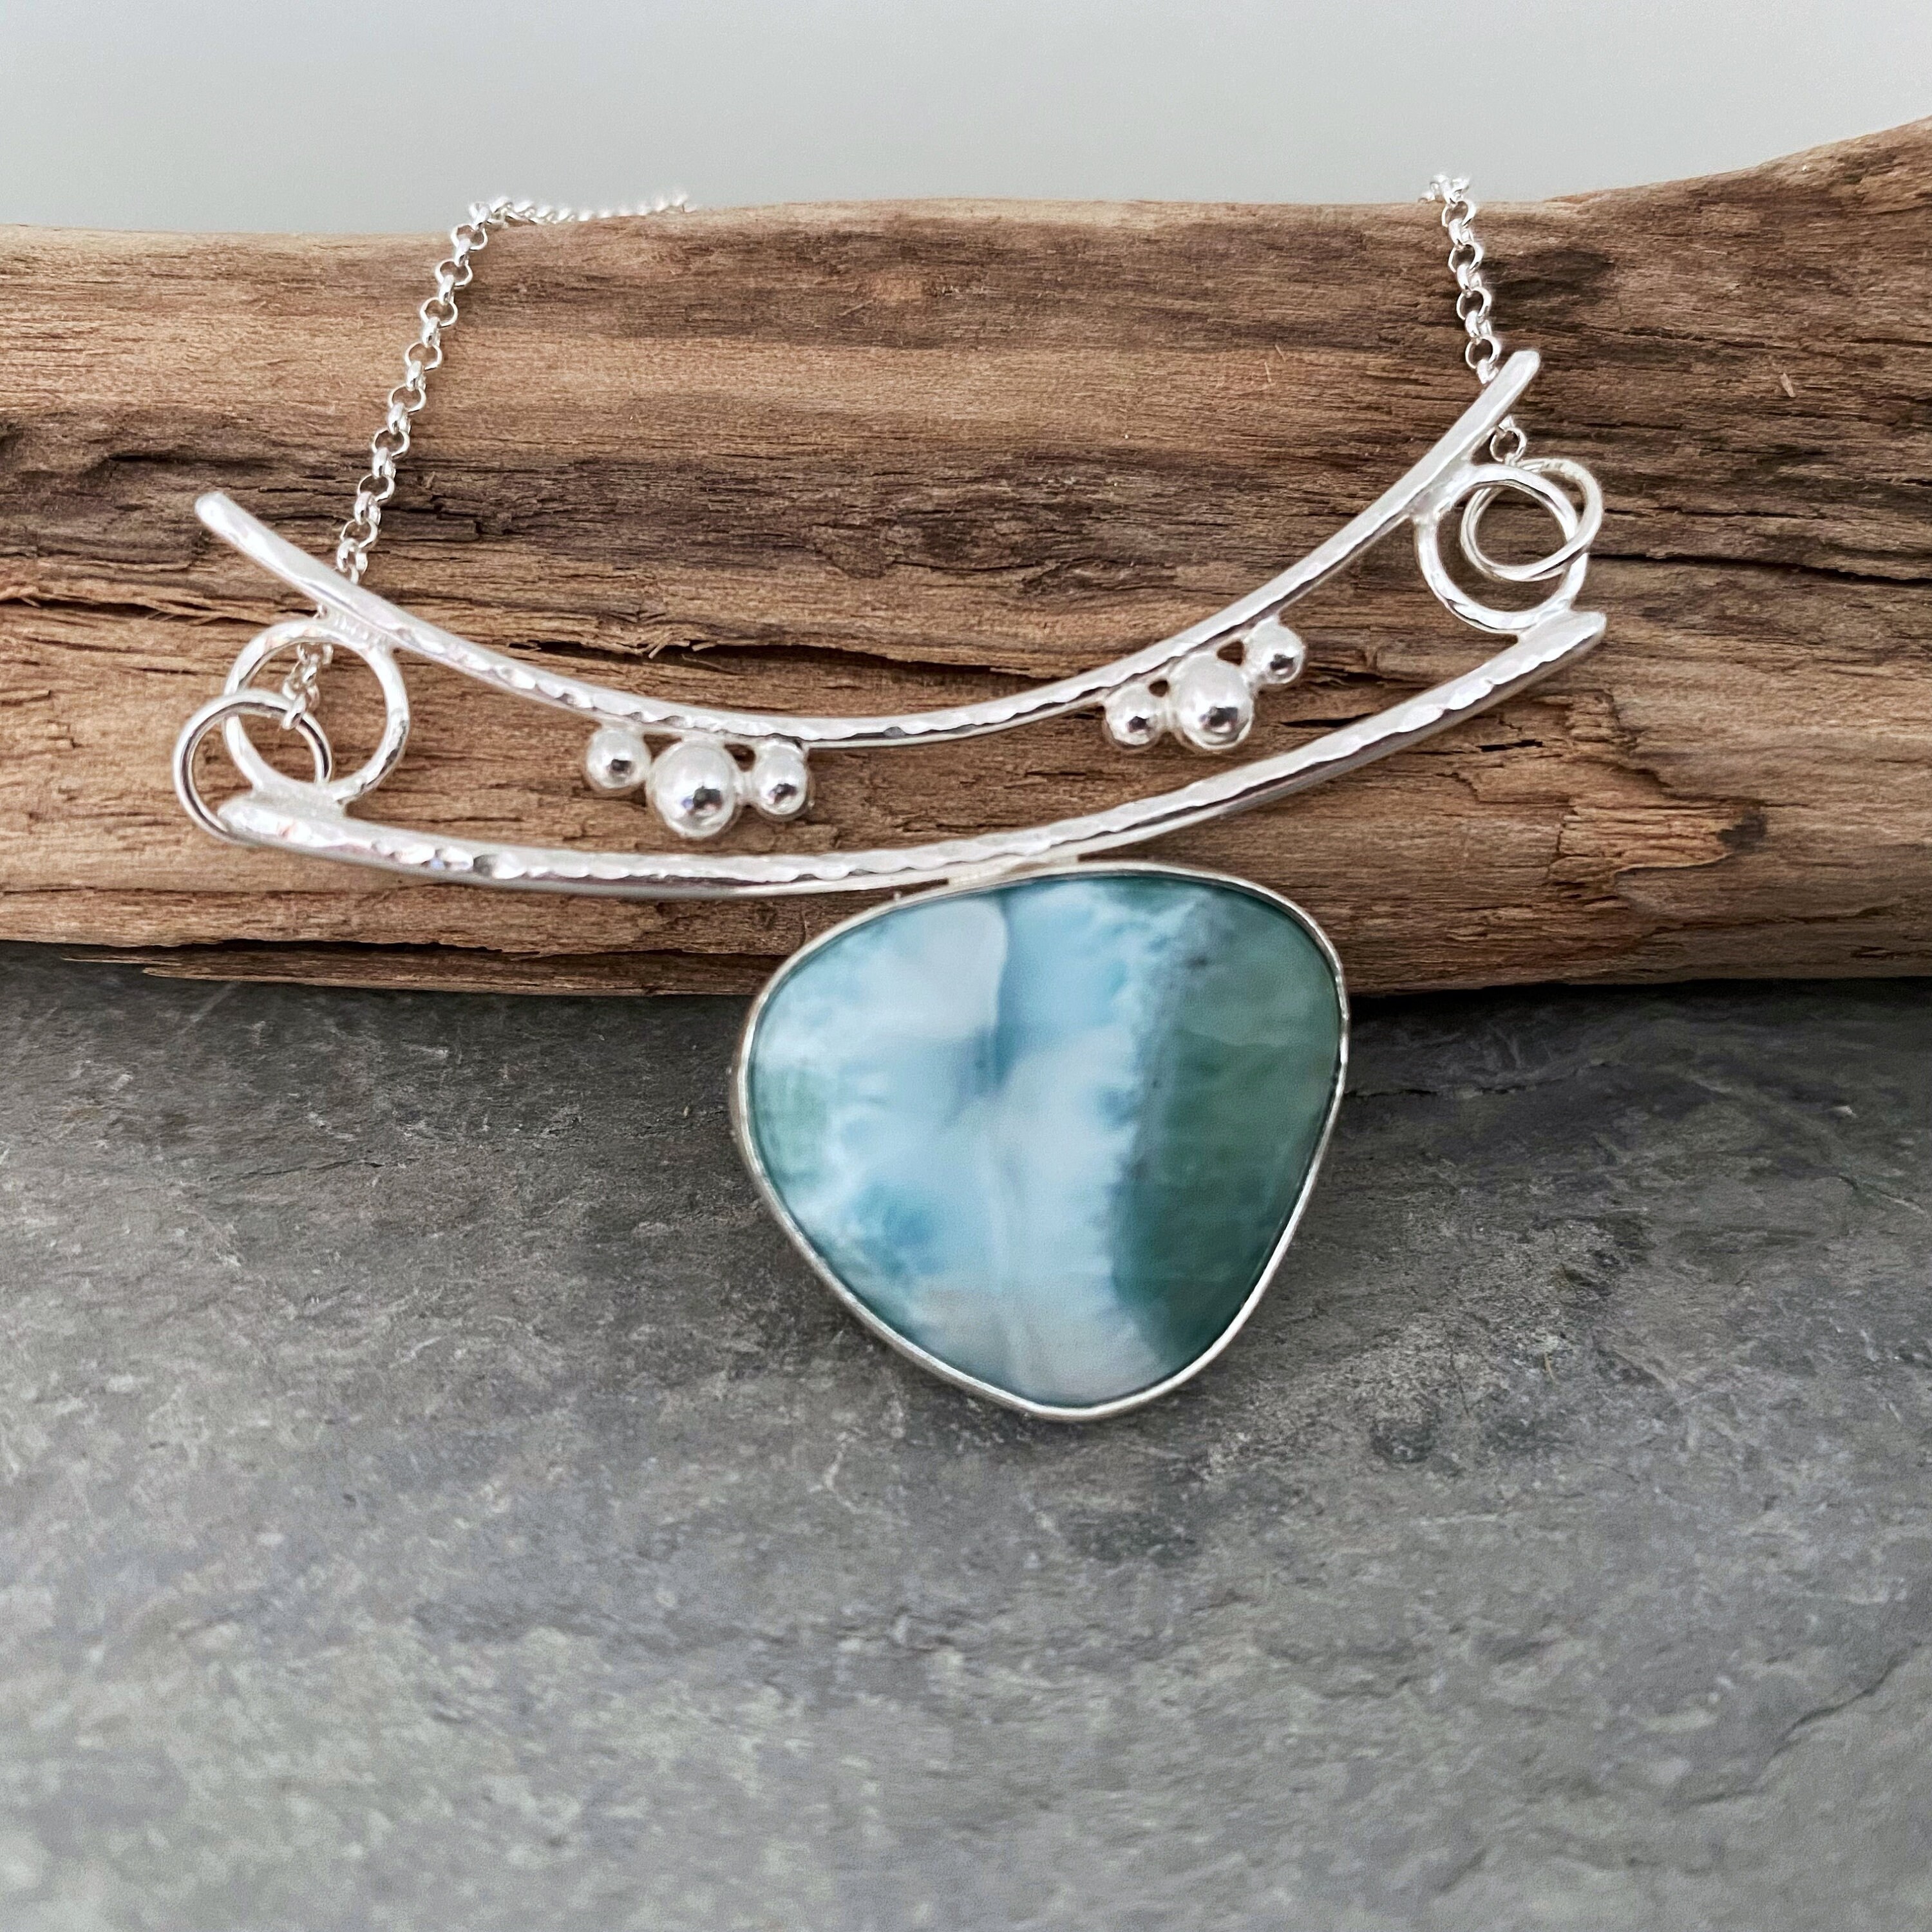 Larimar Necklace, Silver & Pendant On A Chain. Blue Gemstone Necklace Inspired By The Sea, Beach Jewellery